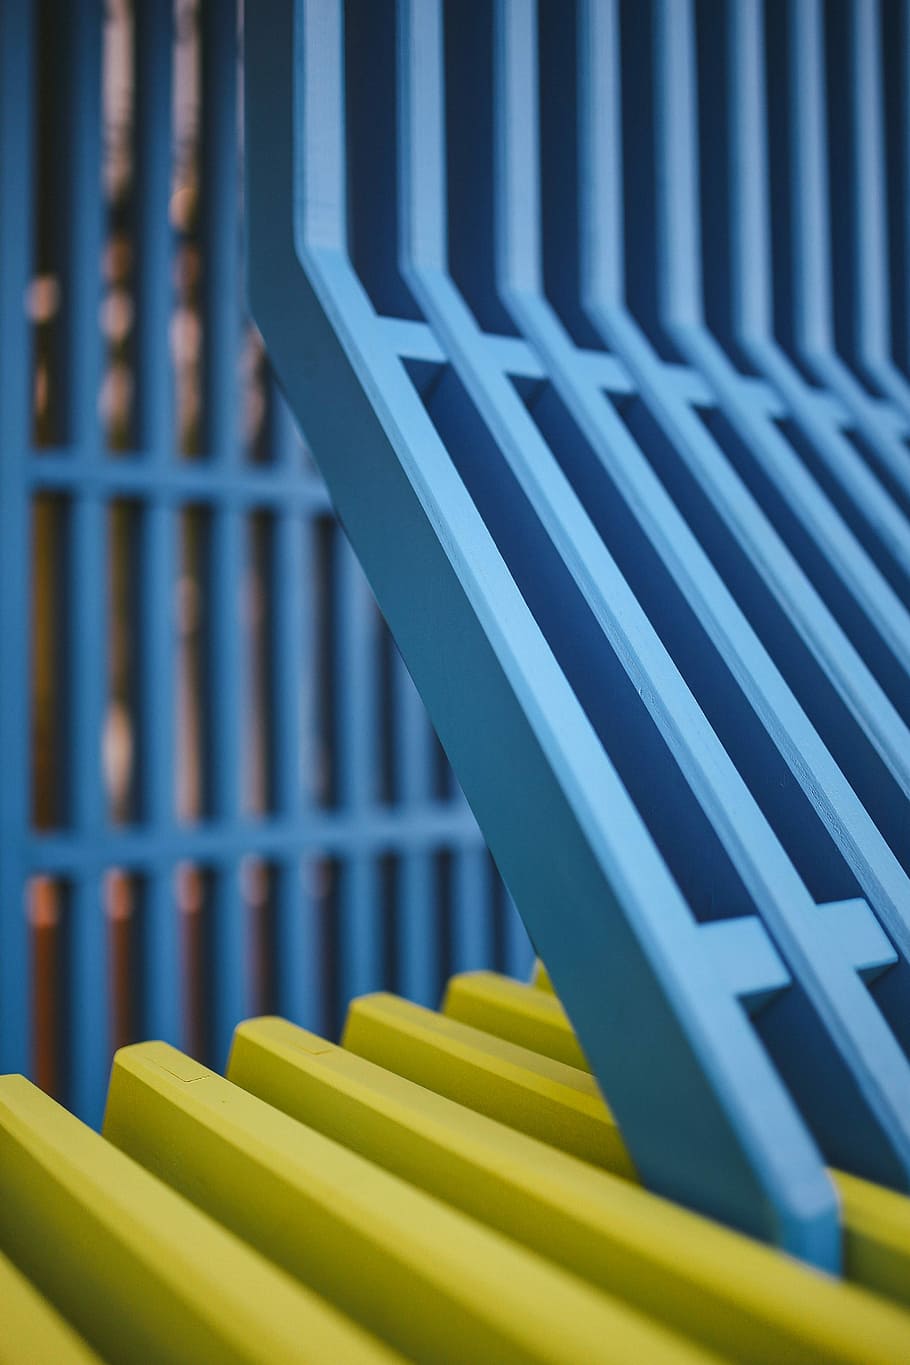 wooden, construction, sand, Colourful, fence, wood, bars, colour, blue, striped